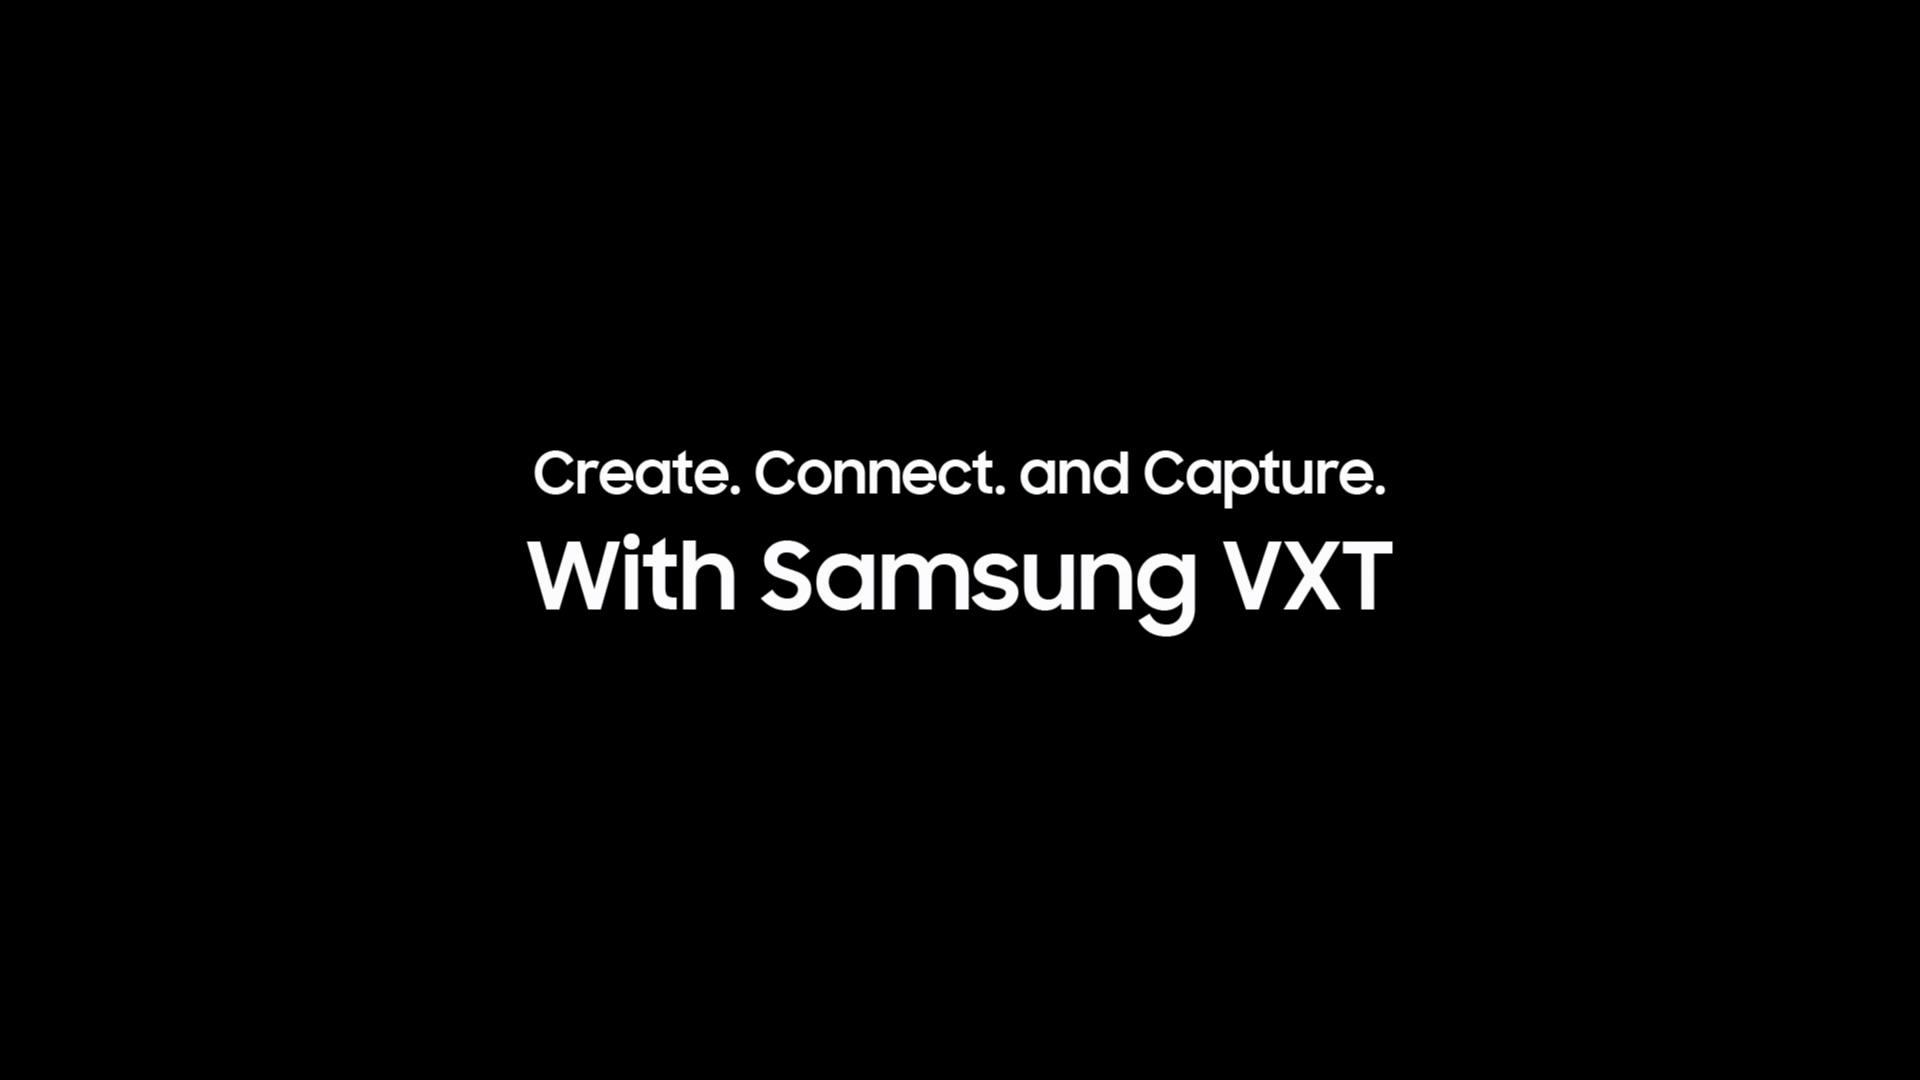 create, connect, and capture with Samsung VXT